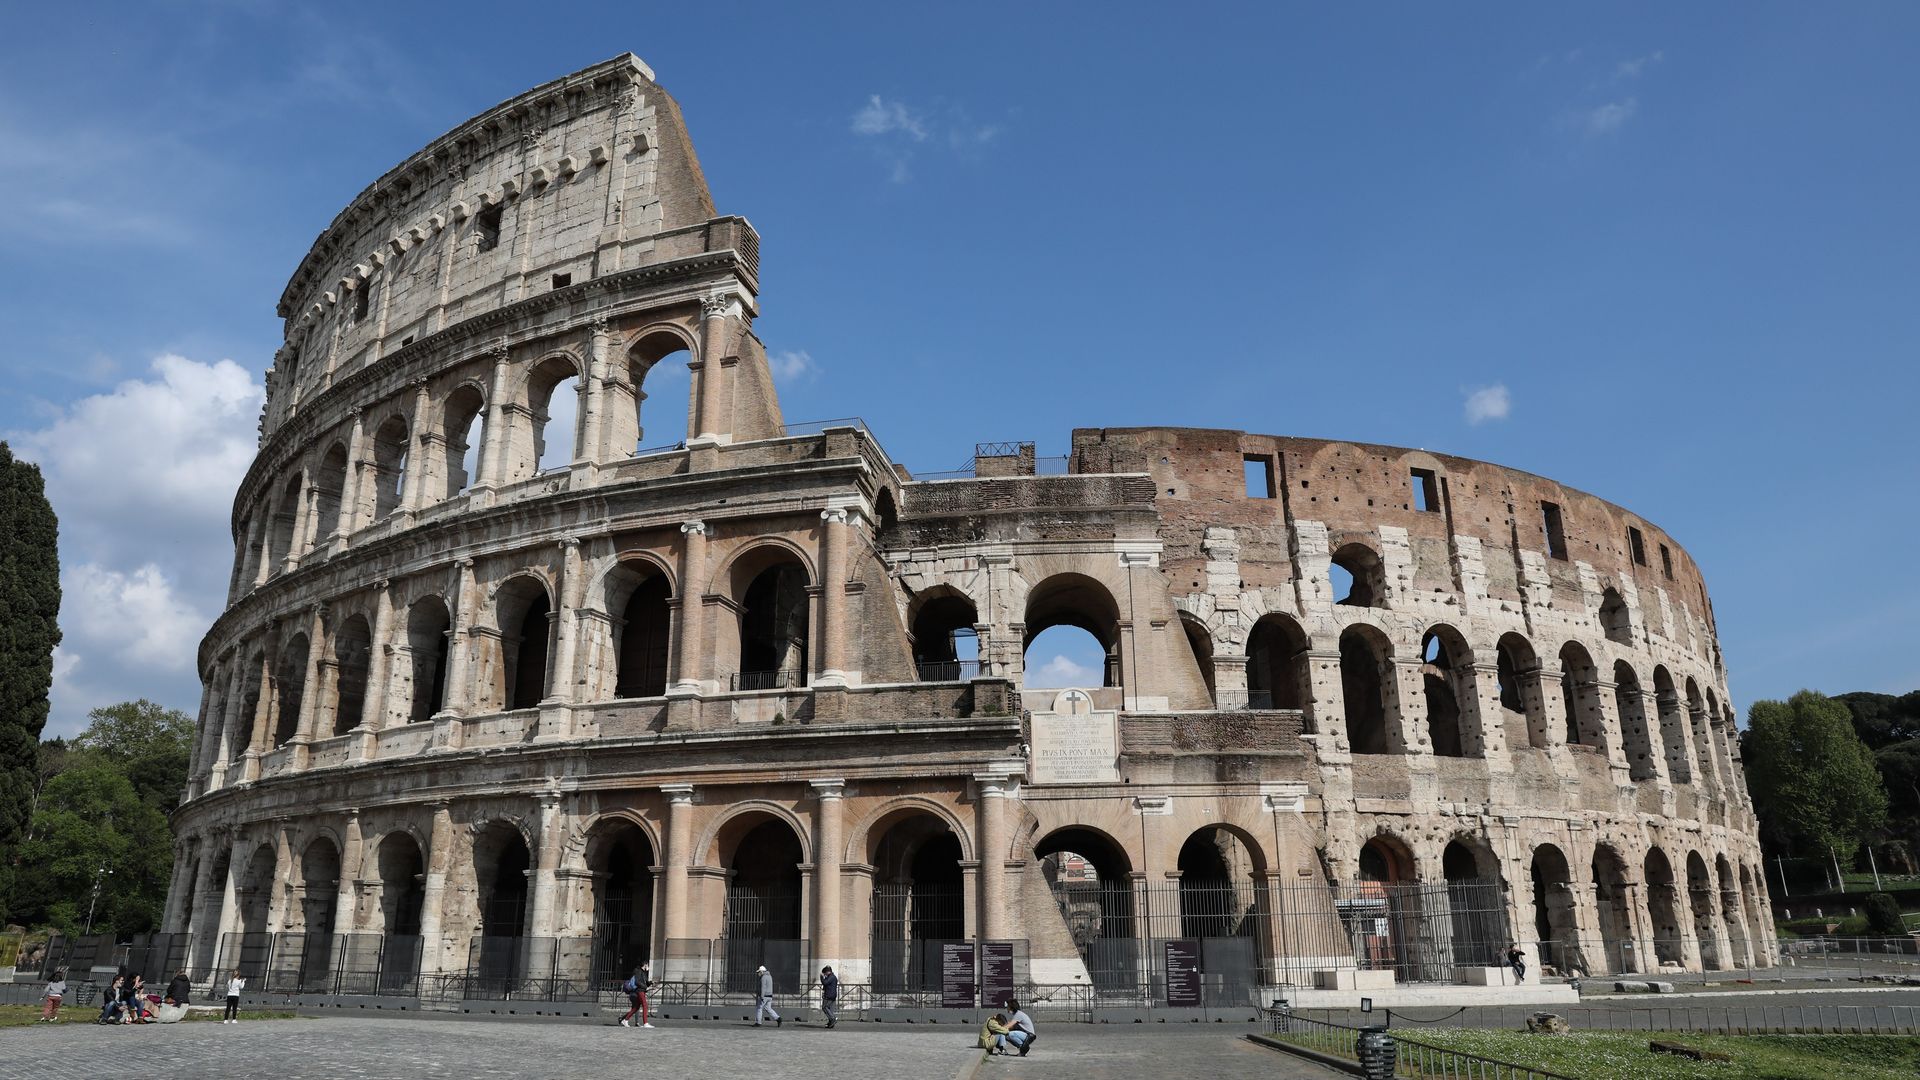 People enjoy beautiful weather outside the Colosseum in Rome, Italy, April 2